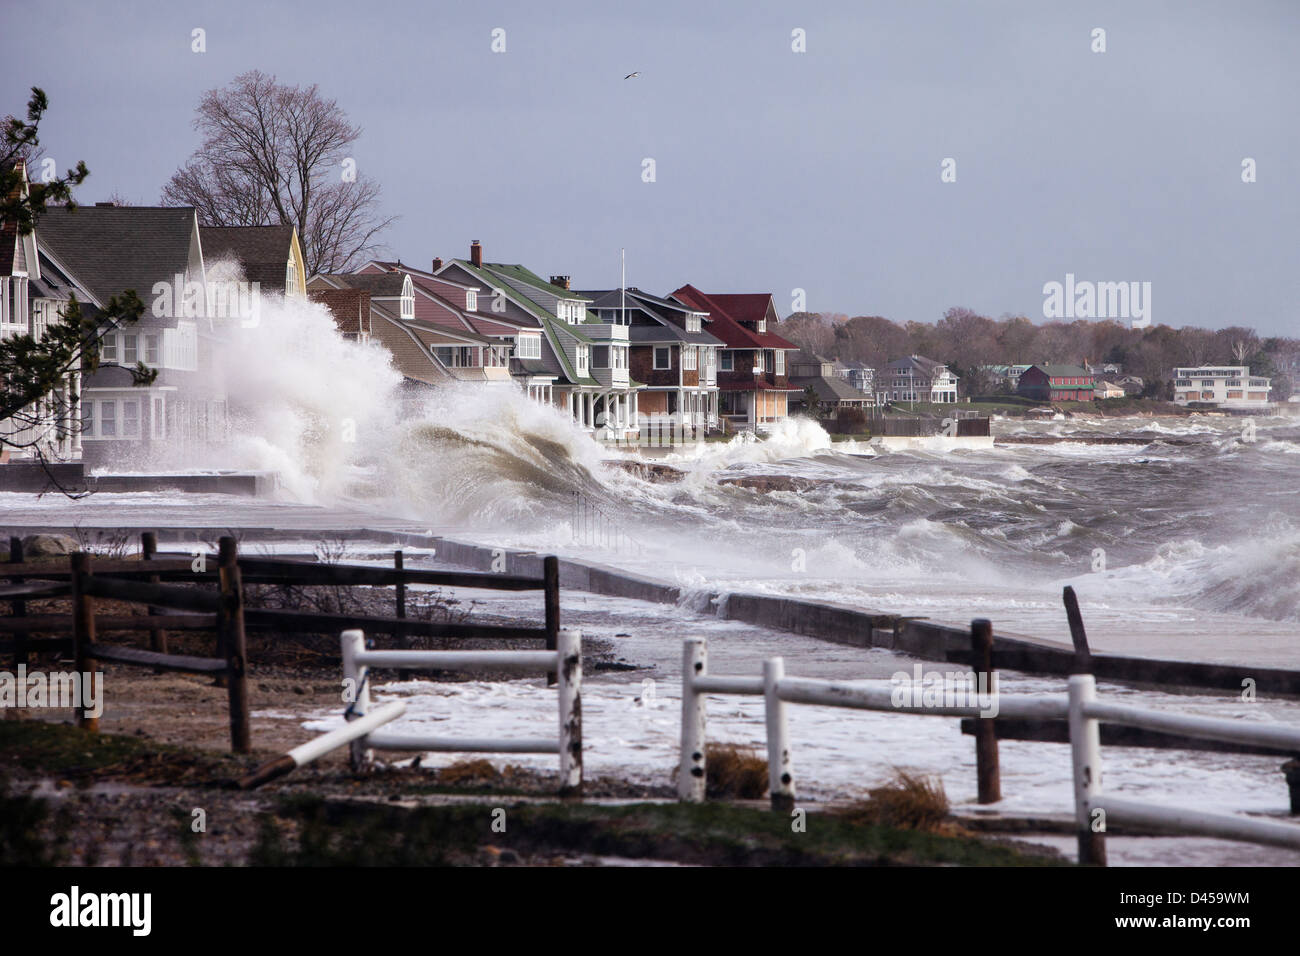 Summer houses in Madison Connecticut being hit by waves by an extremely high tide, from Hurricane Sandy. Stock Photo